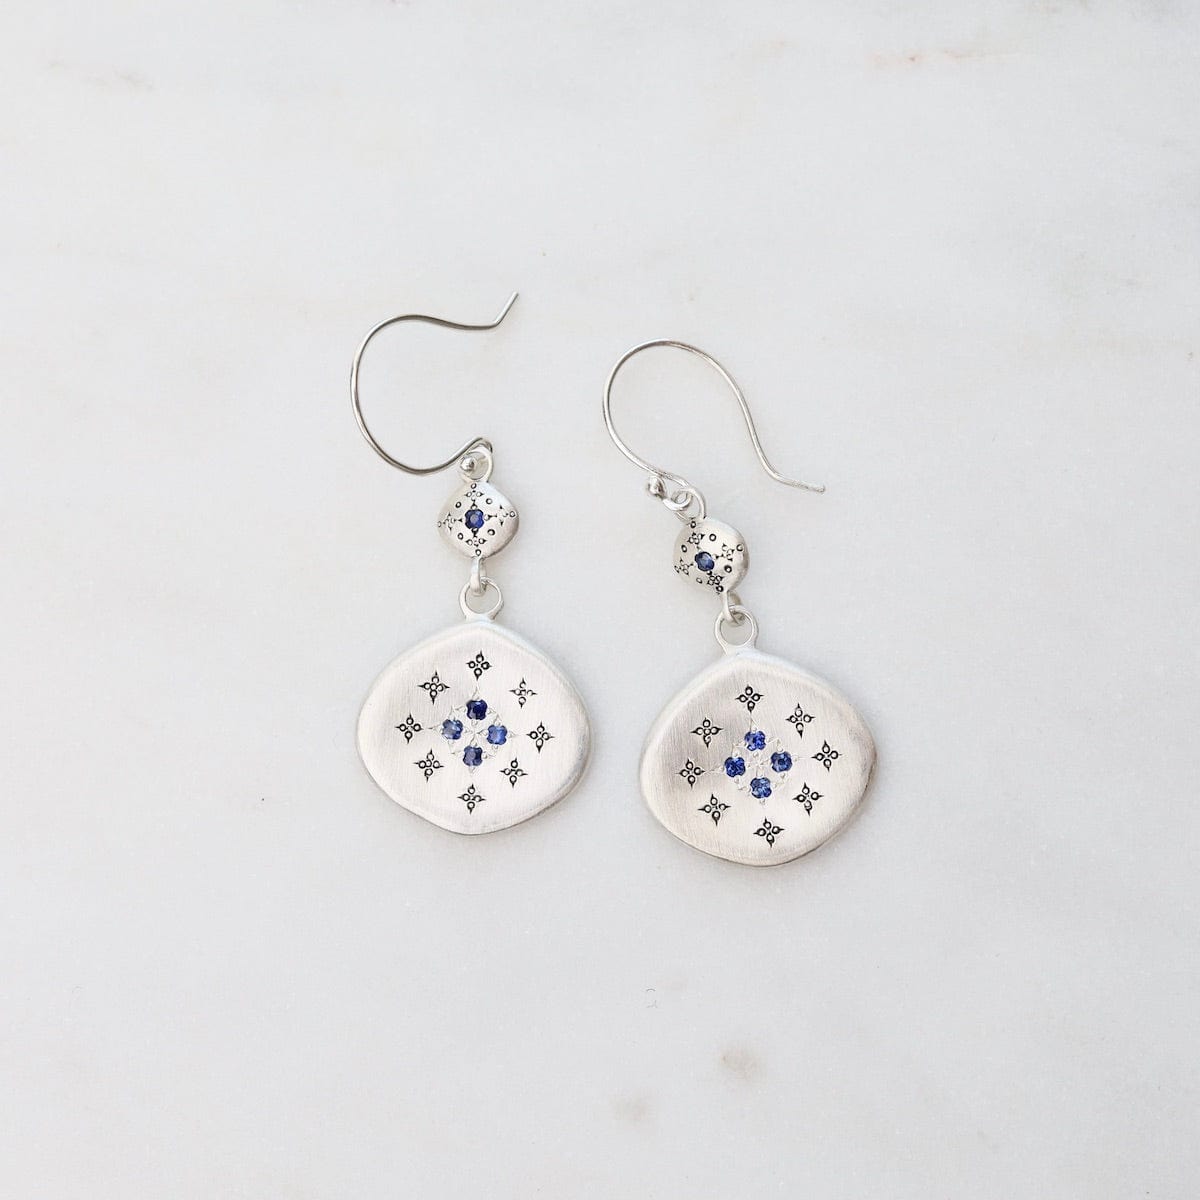 EAR Silver Lights Earrings with Charms in Blue Sapphire